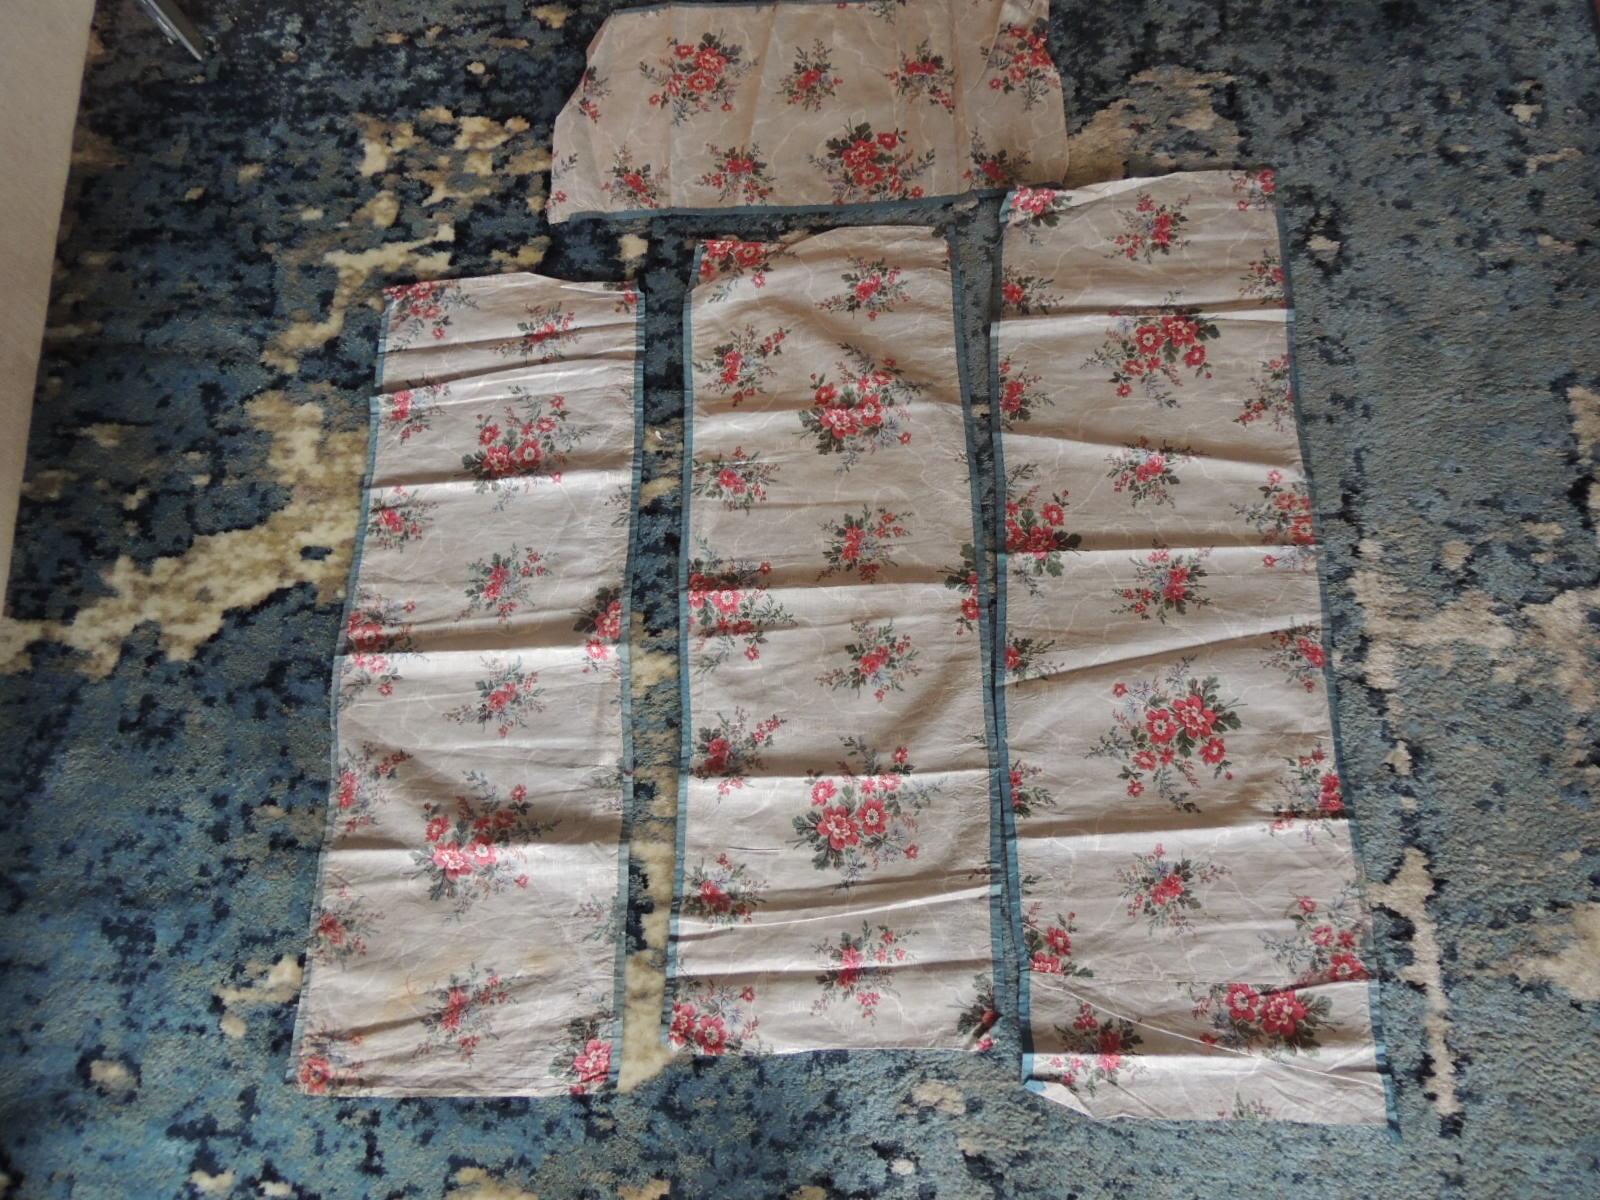 Set of (4) antique floral valances textiles.
Small floral lightweight pattern in shades of blue, green and pink.
Ideal for pillows.
Four panels ranging from 26